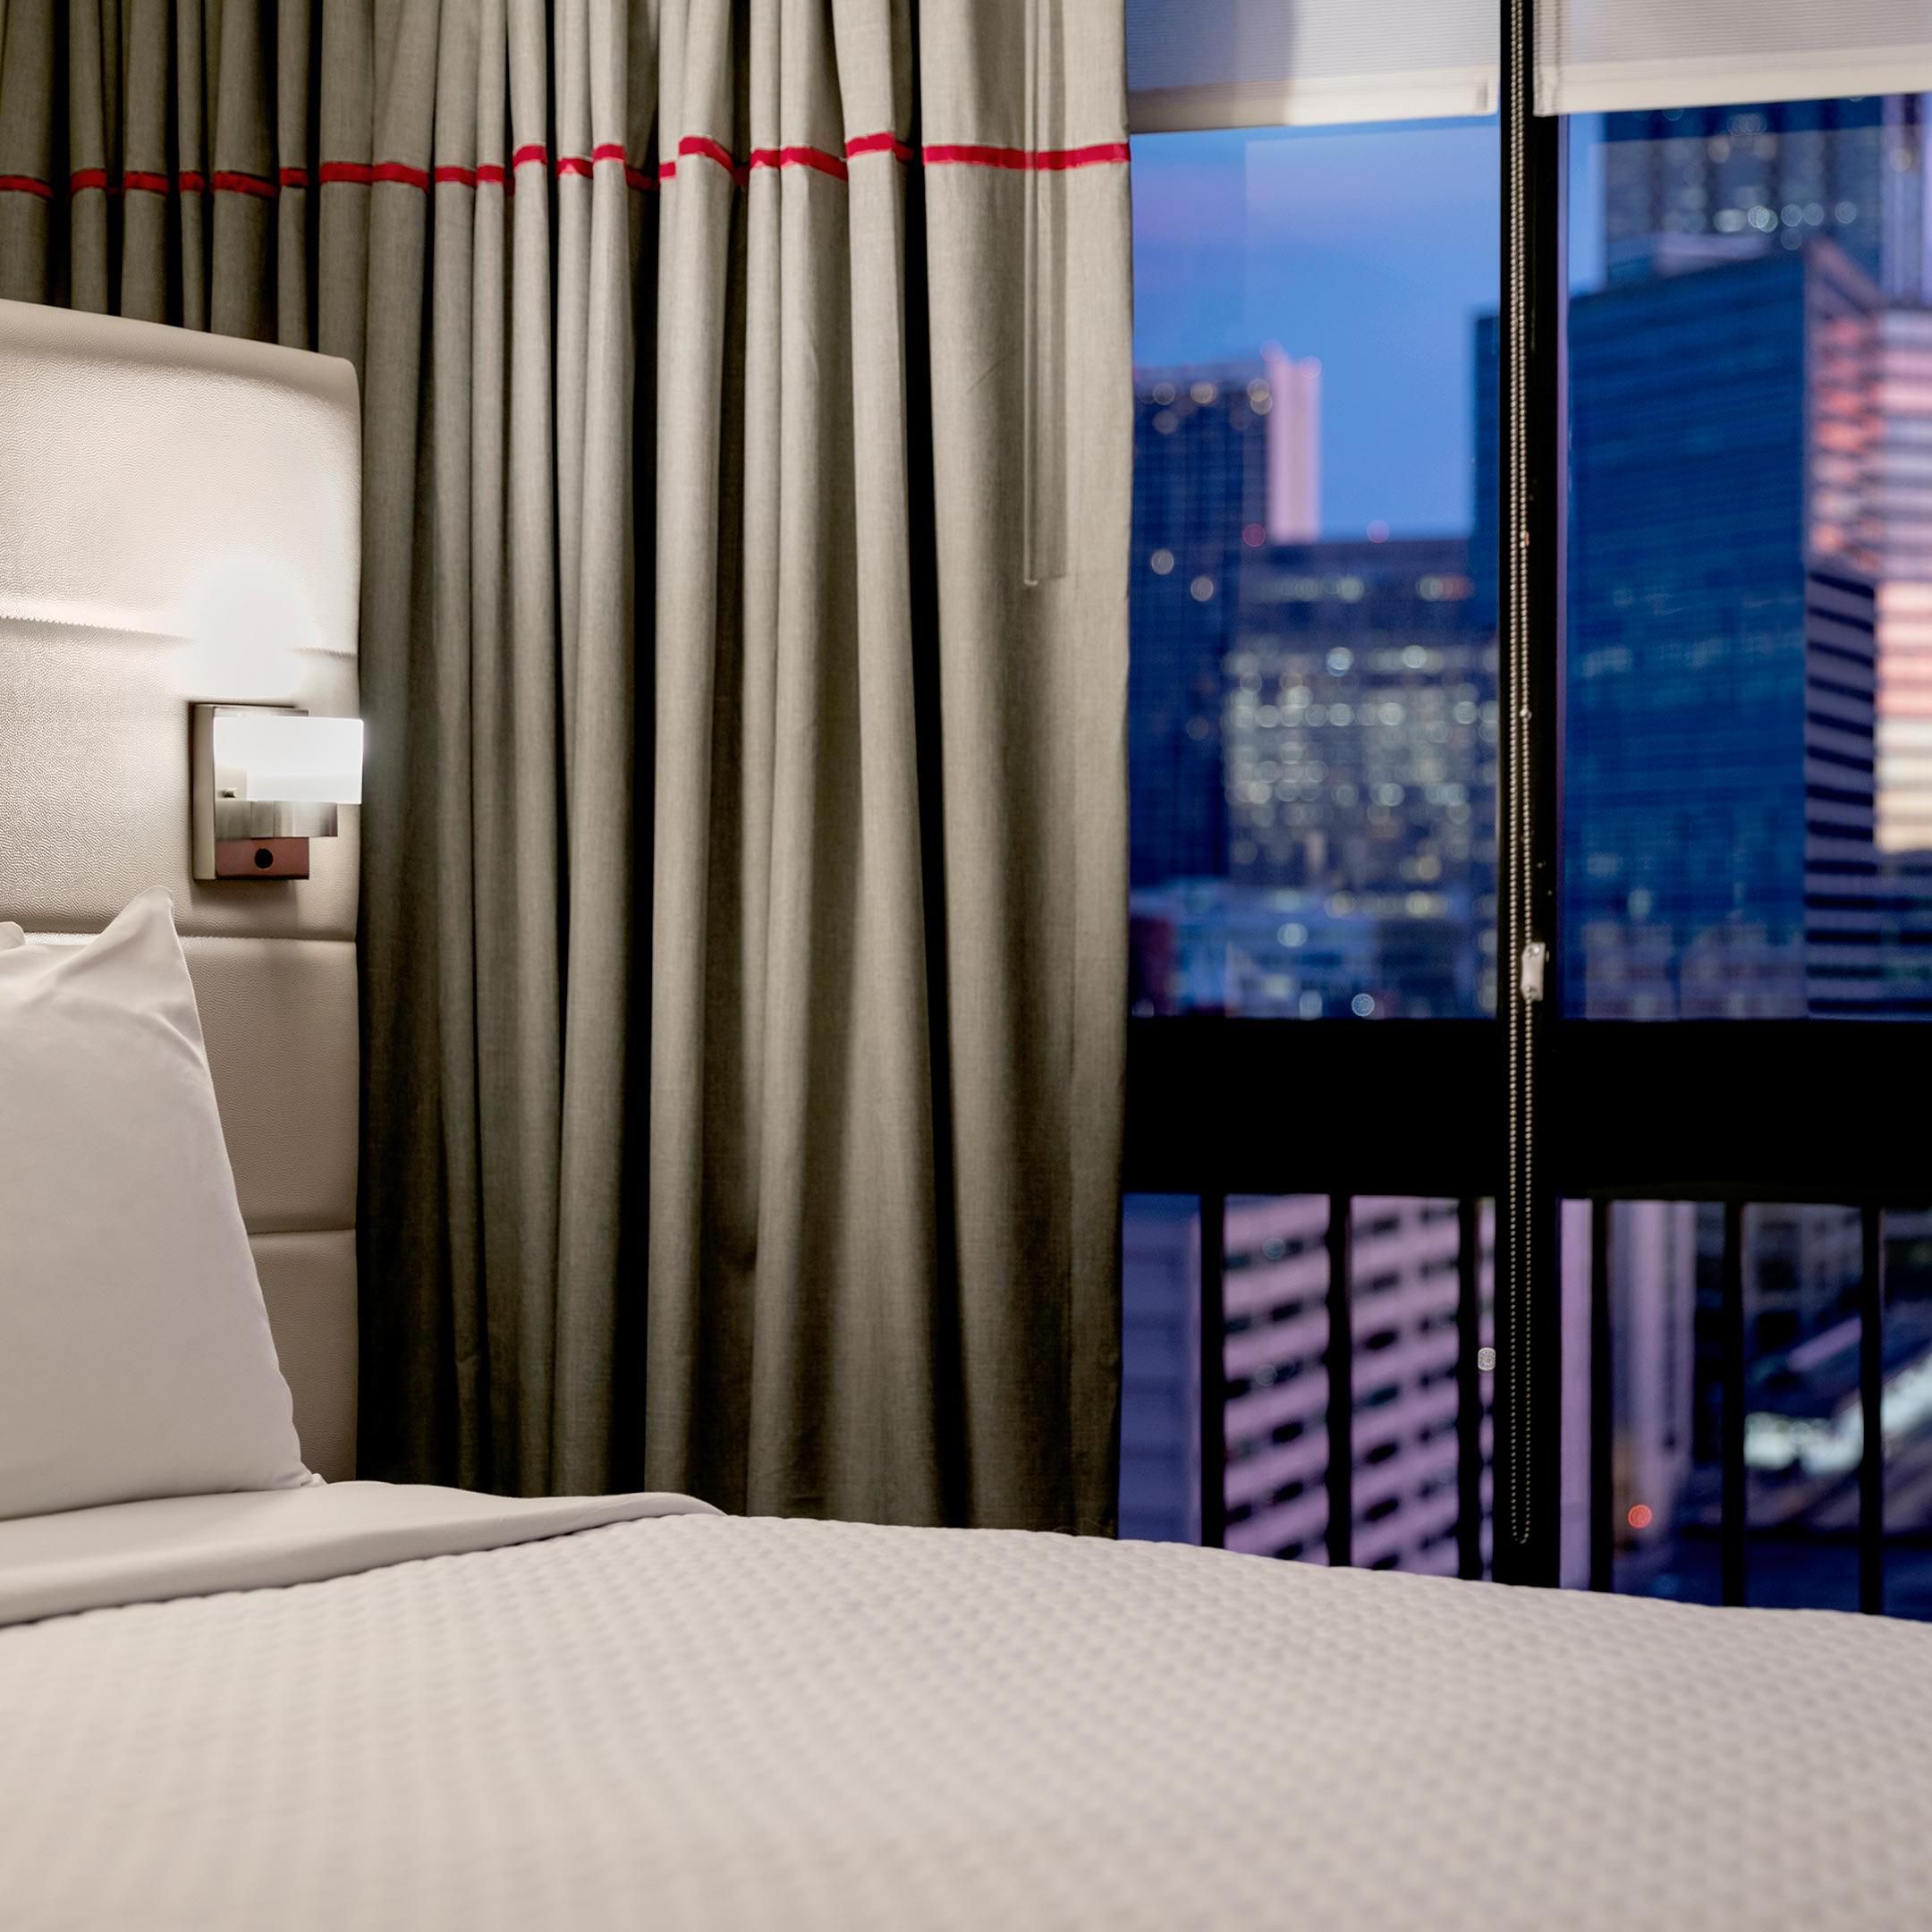 At the end of a long day, relax in our clean, fresh guest rooms.